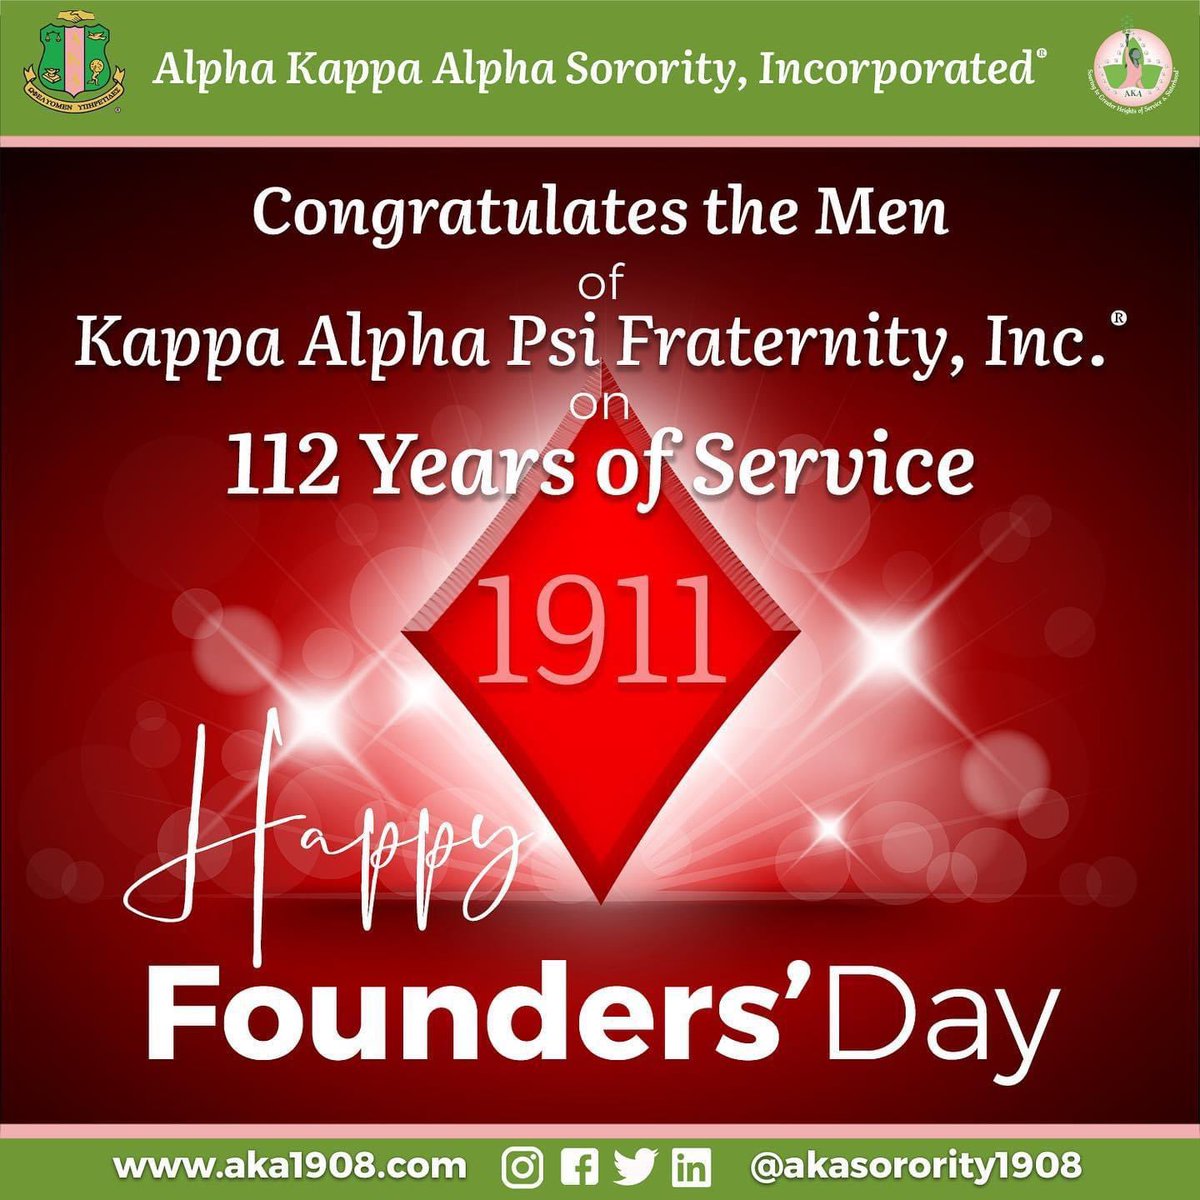 Happy Founders’ Day to the amazing men of Kappa Alpha Psi Fraternity, Inc. Special shout-out to my favorite Nupe @eddy_luster ♦️👌🏾💕💚